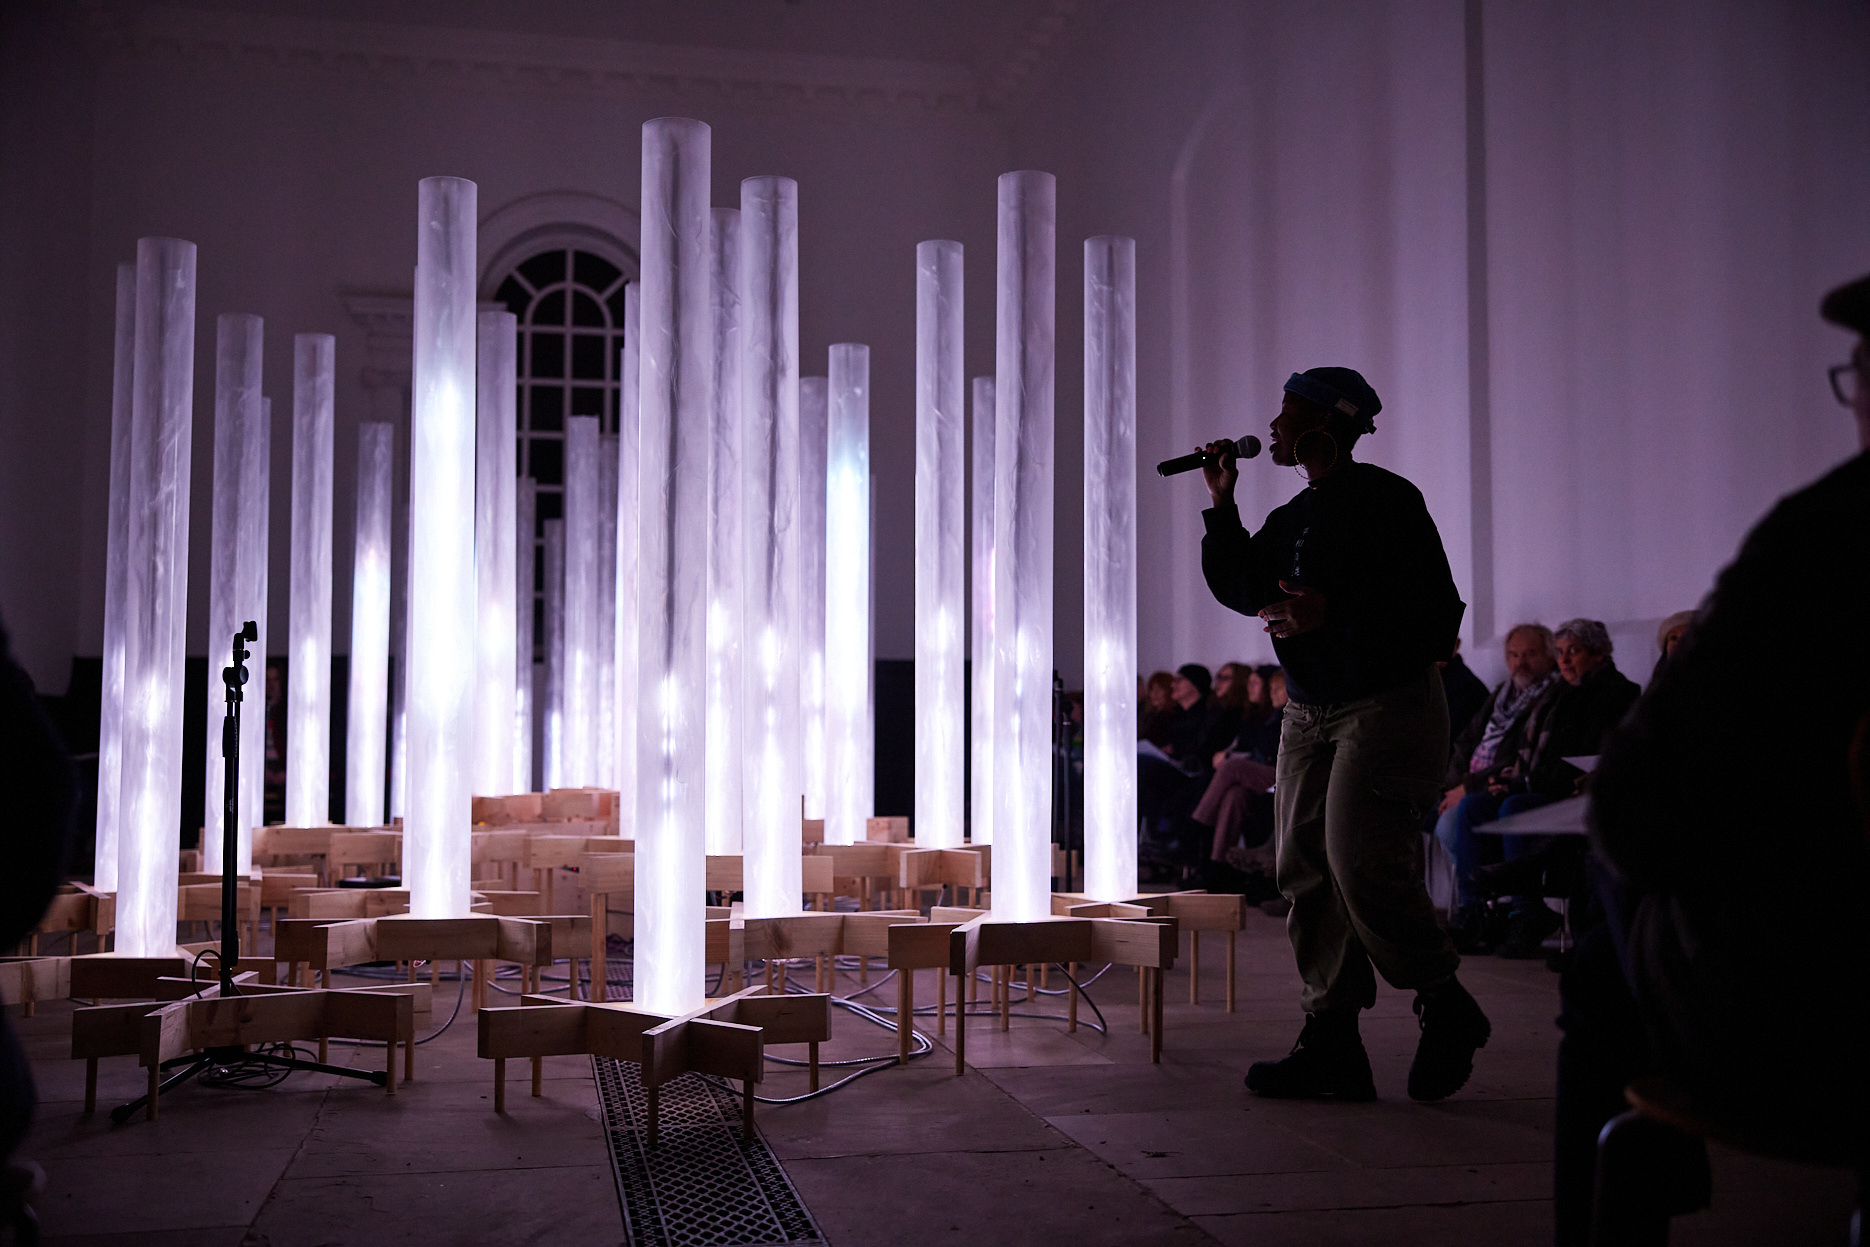 A woman singing into a microphone in front of a collection of white glowing columns